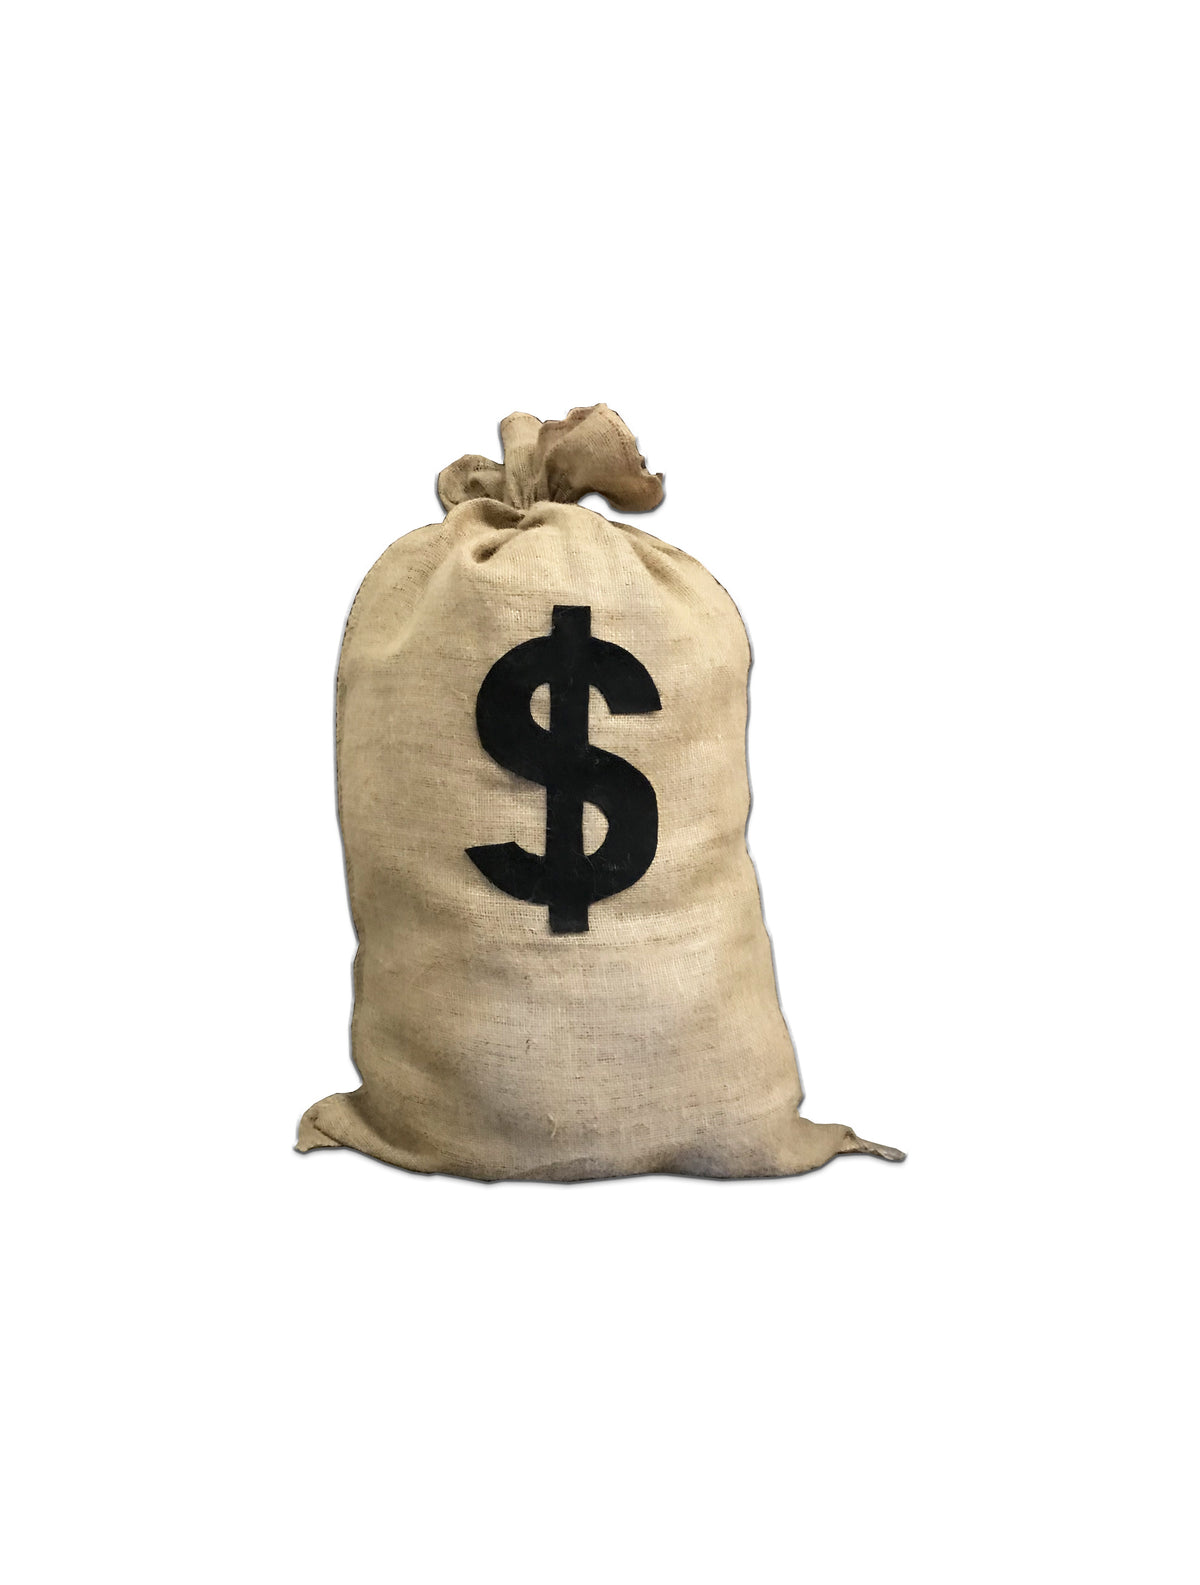 Smoking Money Clipart Hd PNG, The Smoking Money Bag Cartoon, Money Clipart,  Art, Artwork PNG Image For Free Download